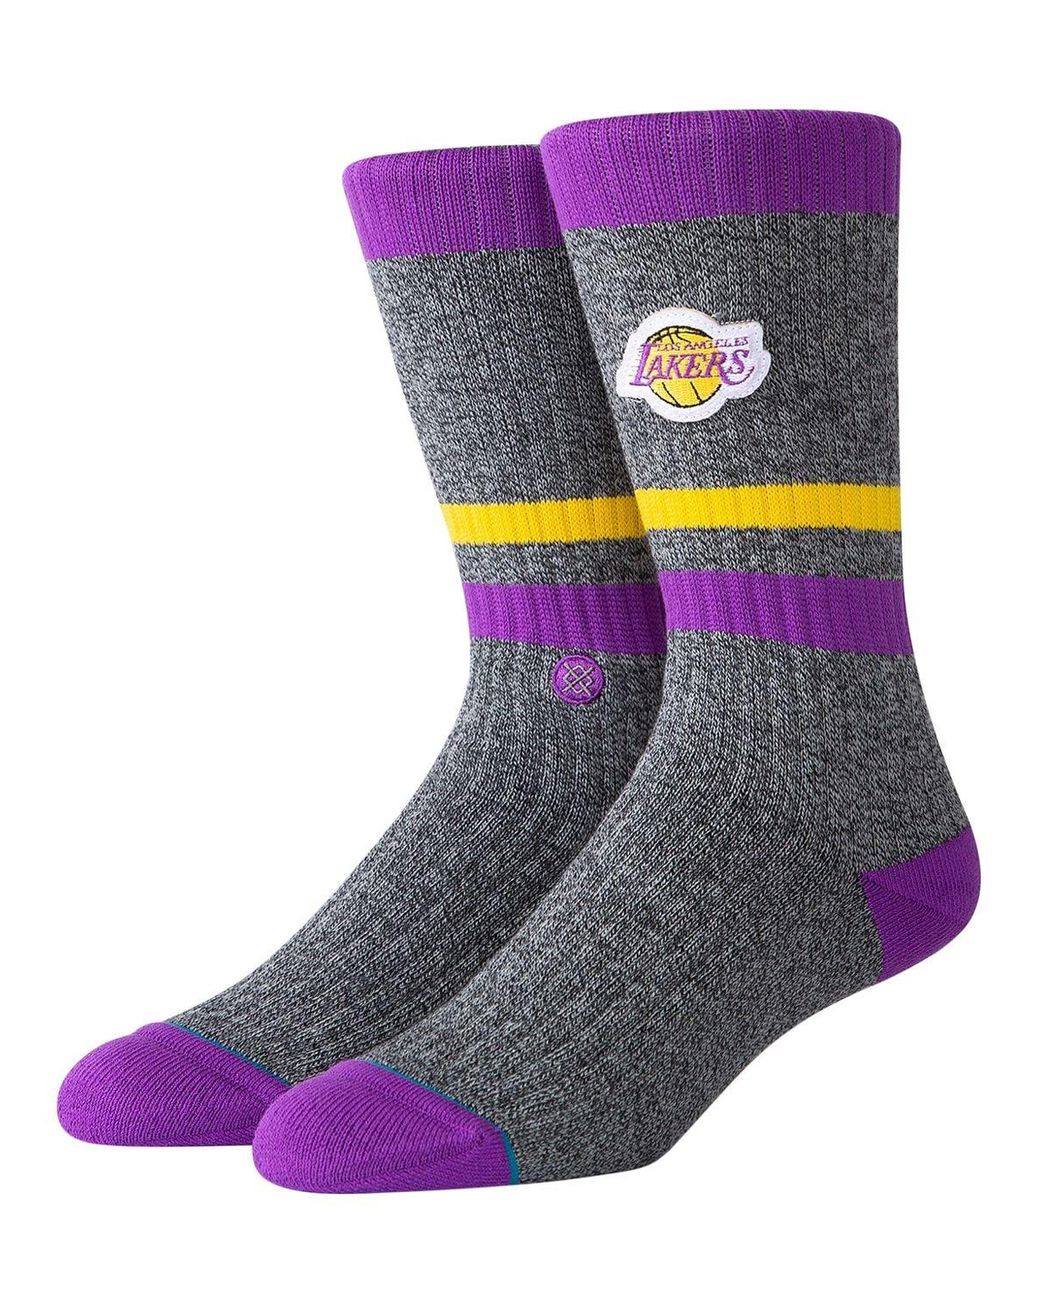 Stance Lakers Boot Socks Large